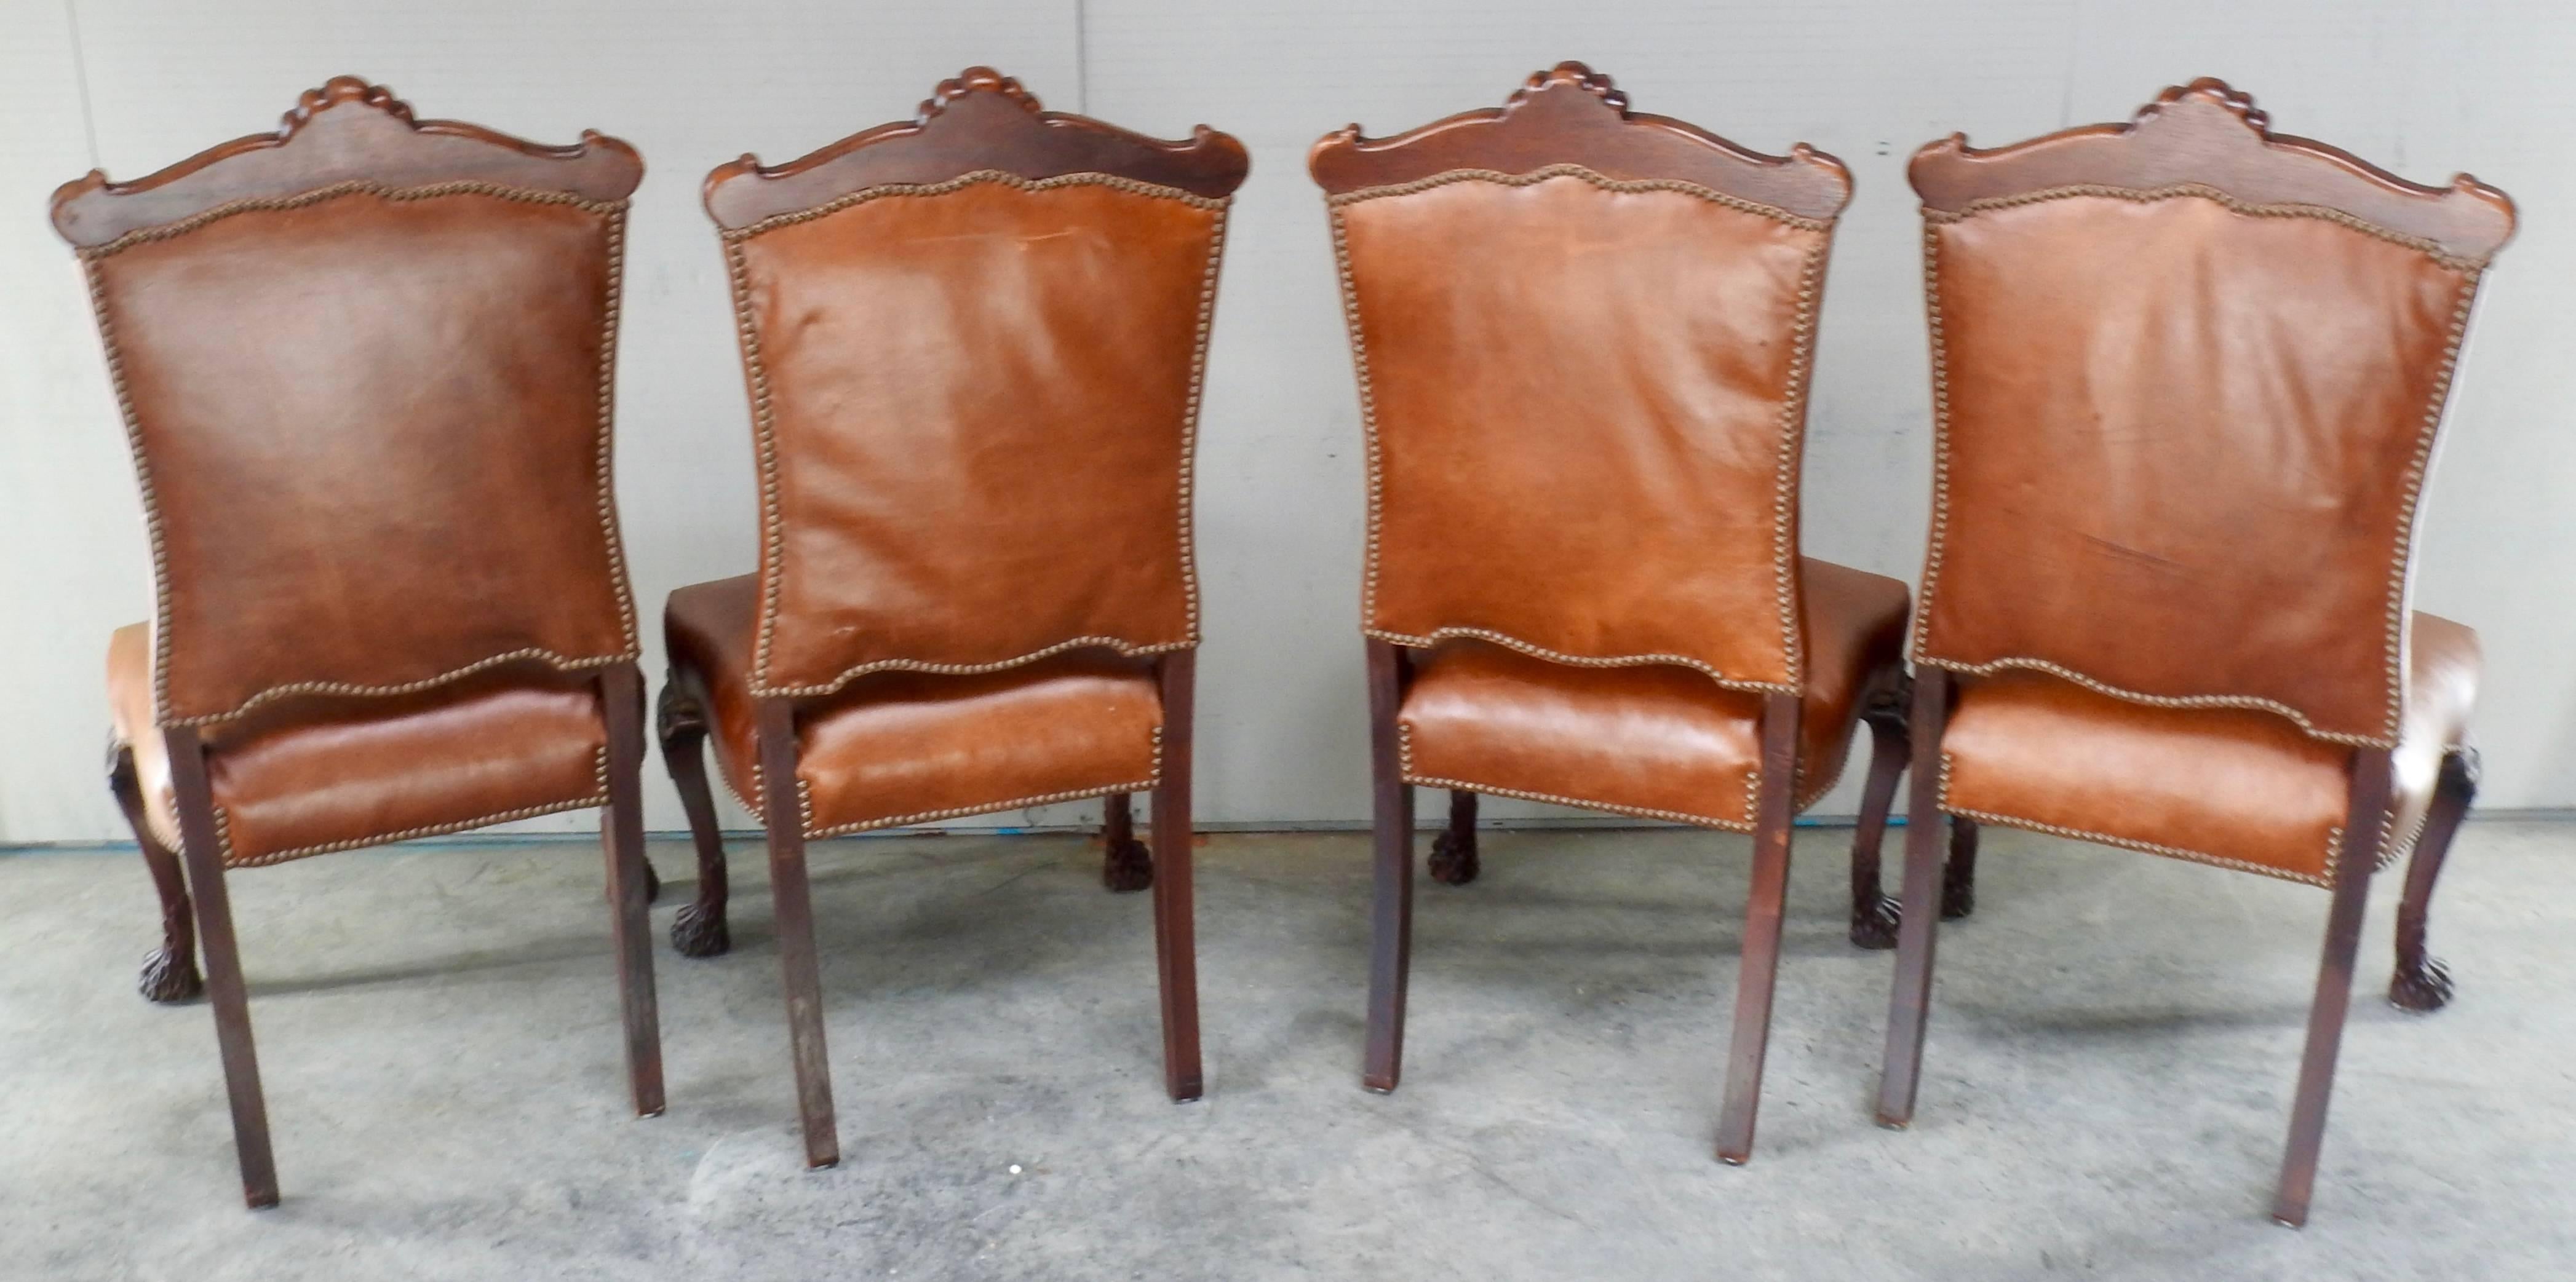 Walnut with leather make up this set of four chairs with Hairy Paw feet. Accented with bronze tacks along the edges. Elegant fan with scrollwork accent the top of each chair.